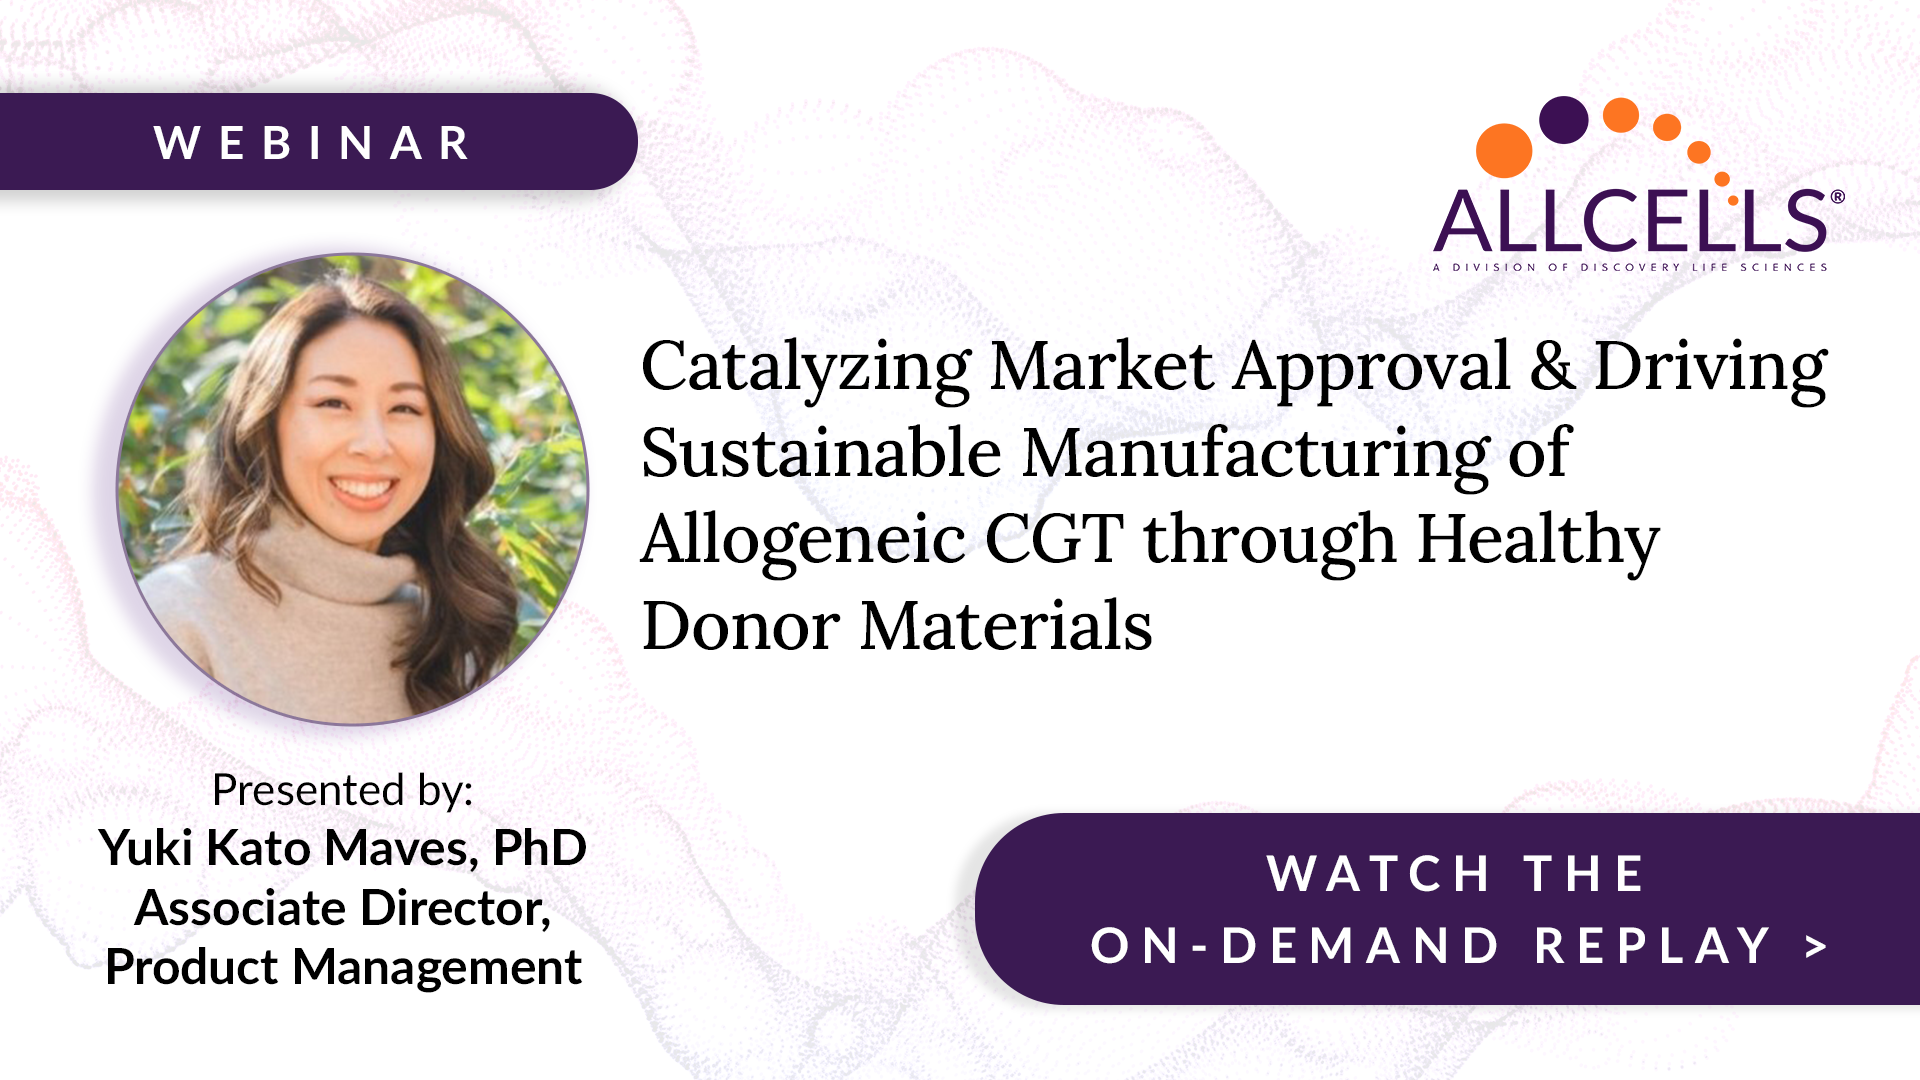 Catalyzing Market Approval & Driving Sustainable Manufacturing of Allogeneic CGT through Healthy Donor Materials